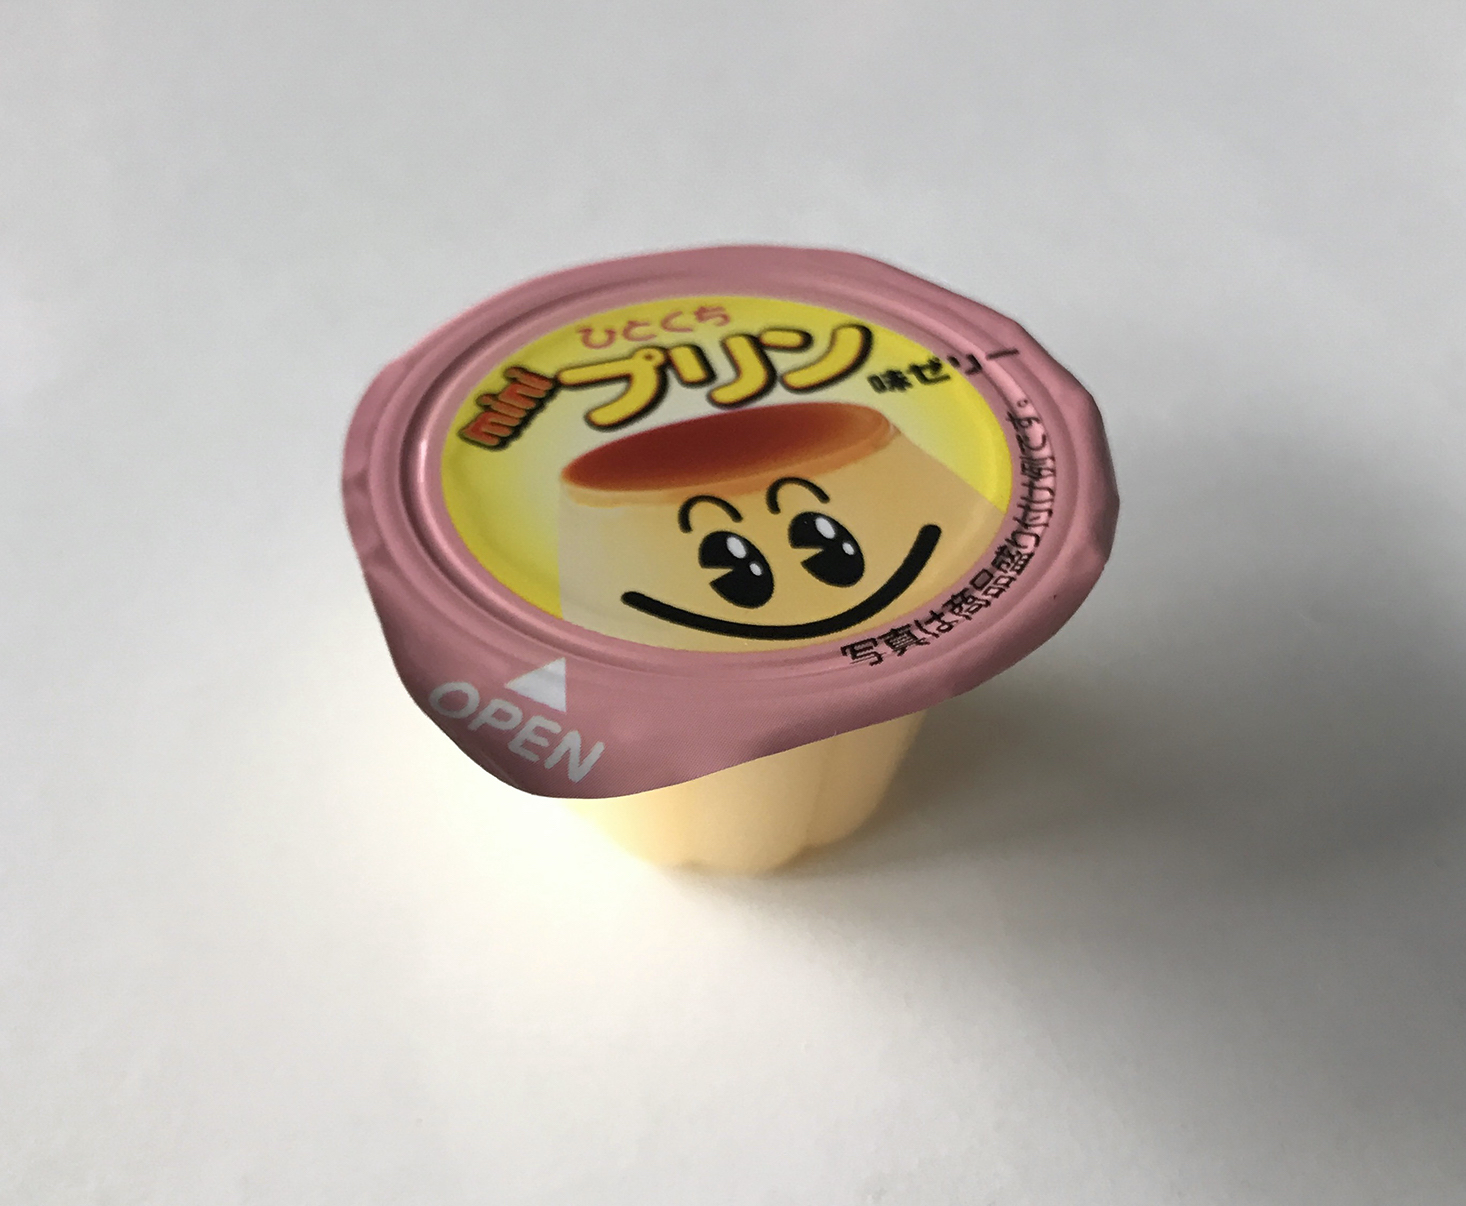 Japan-Crate-February-2017-Pudding